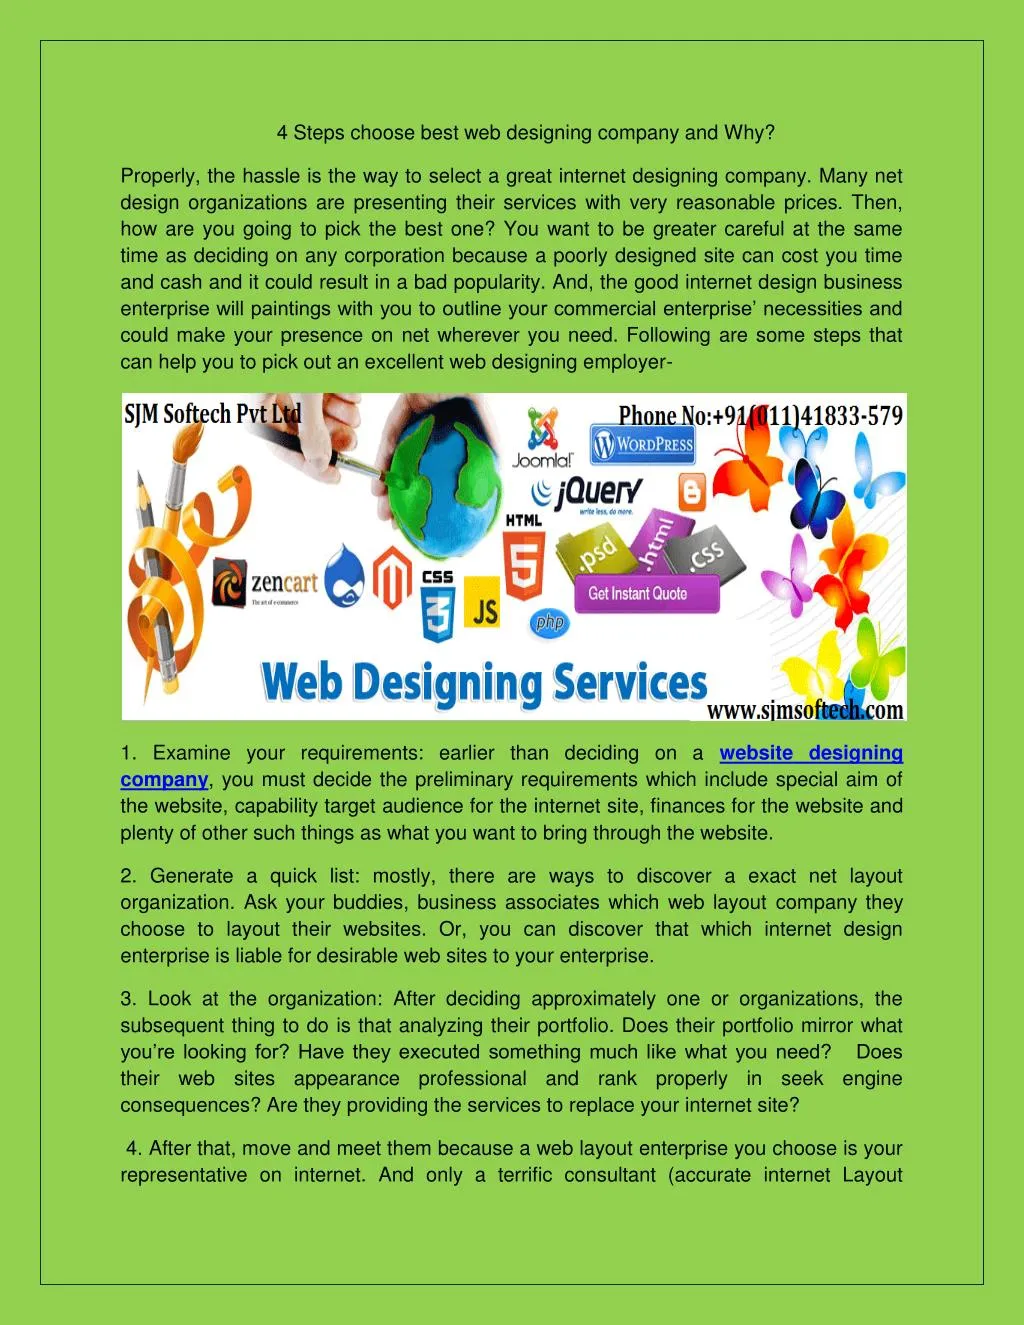 4 steps choose best web designing company and why